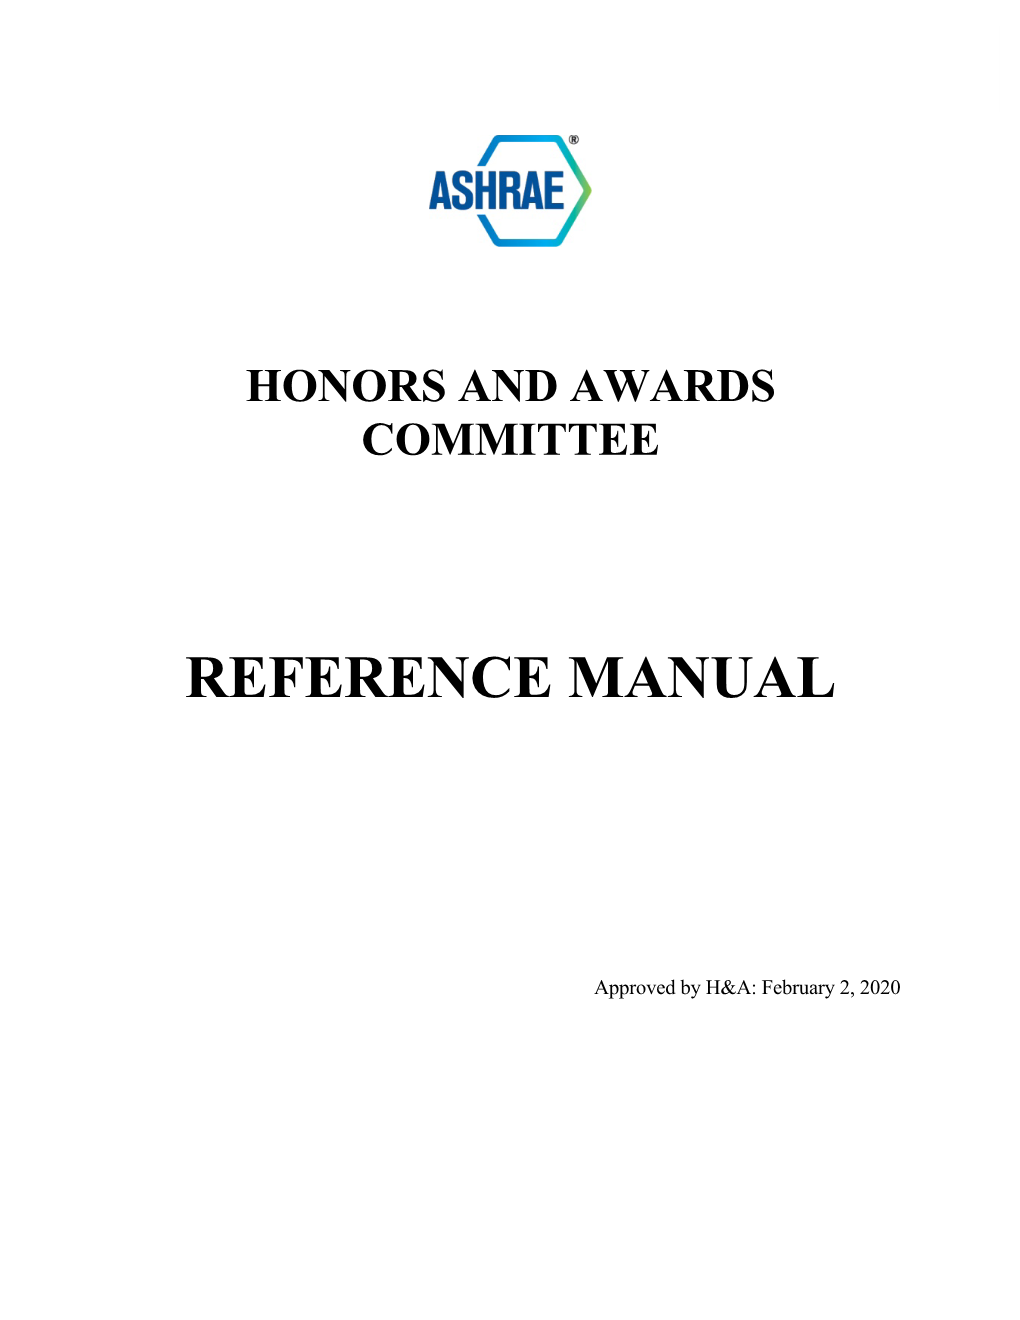 Honors and Awards Reference Manual